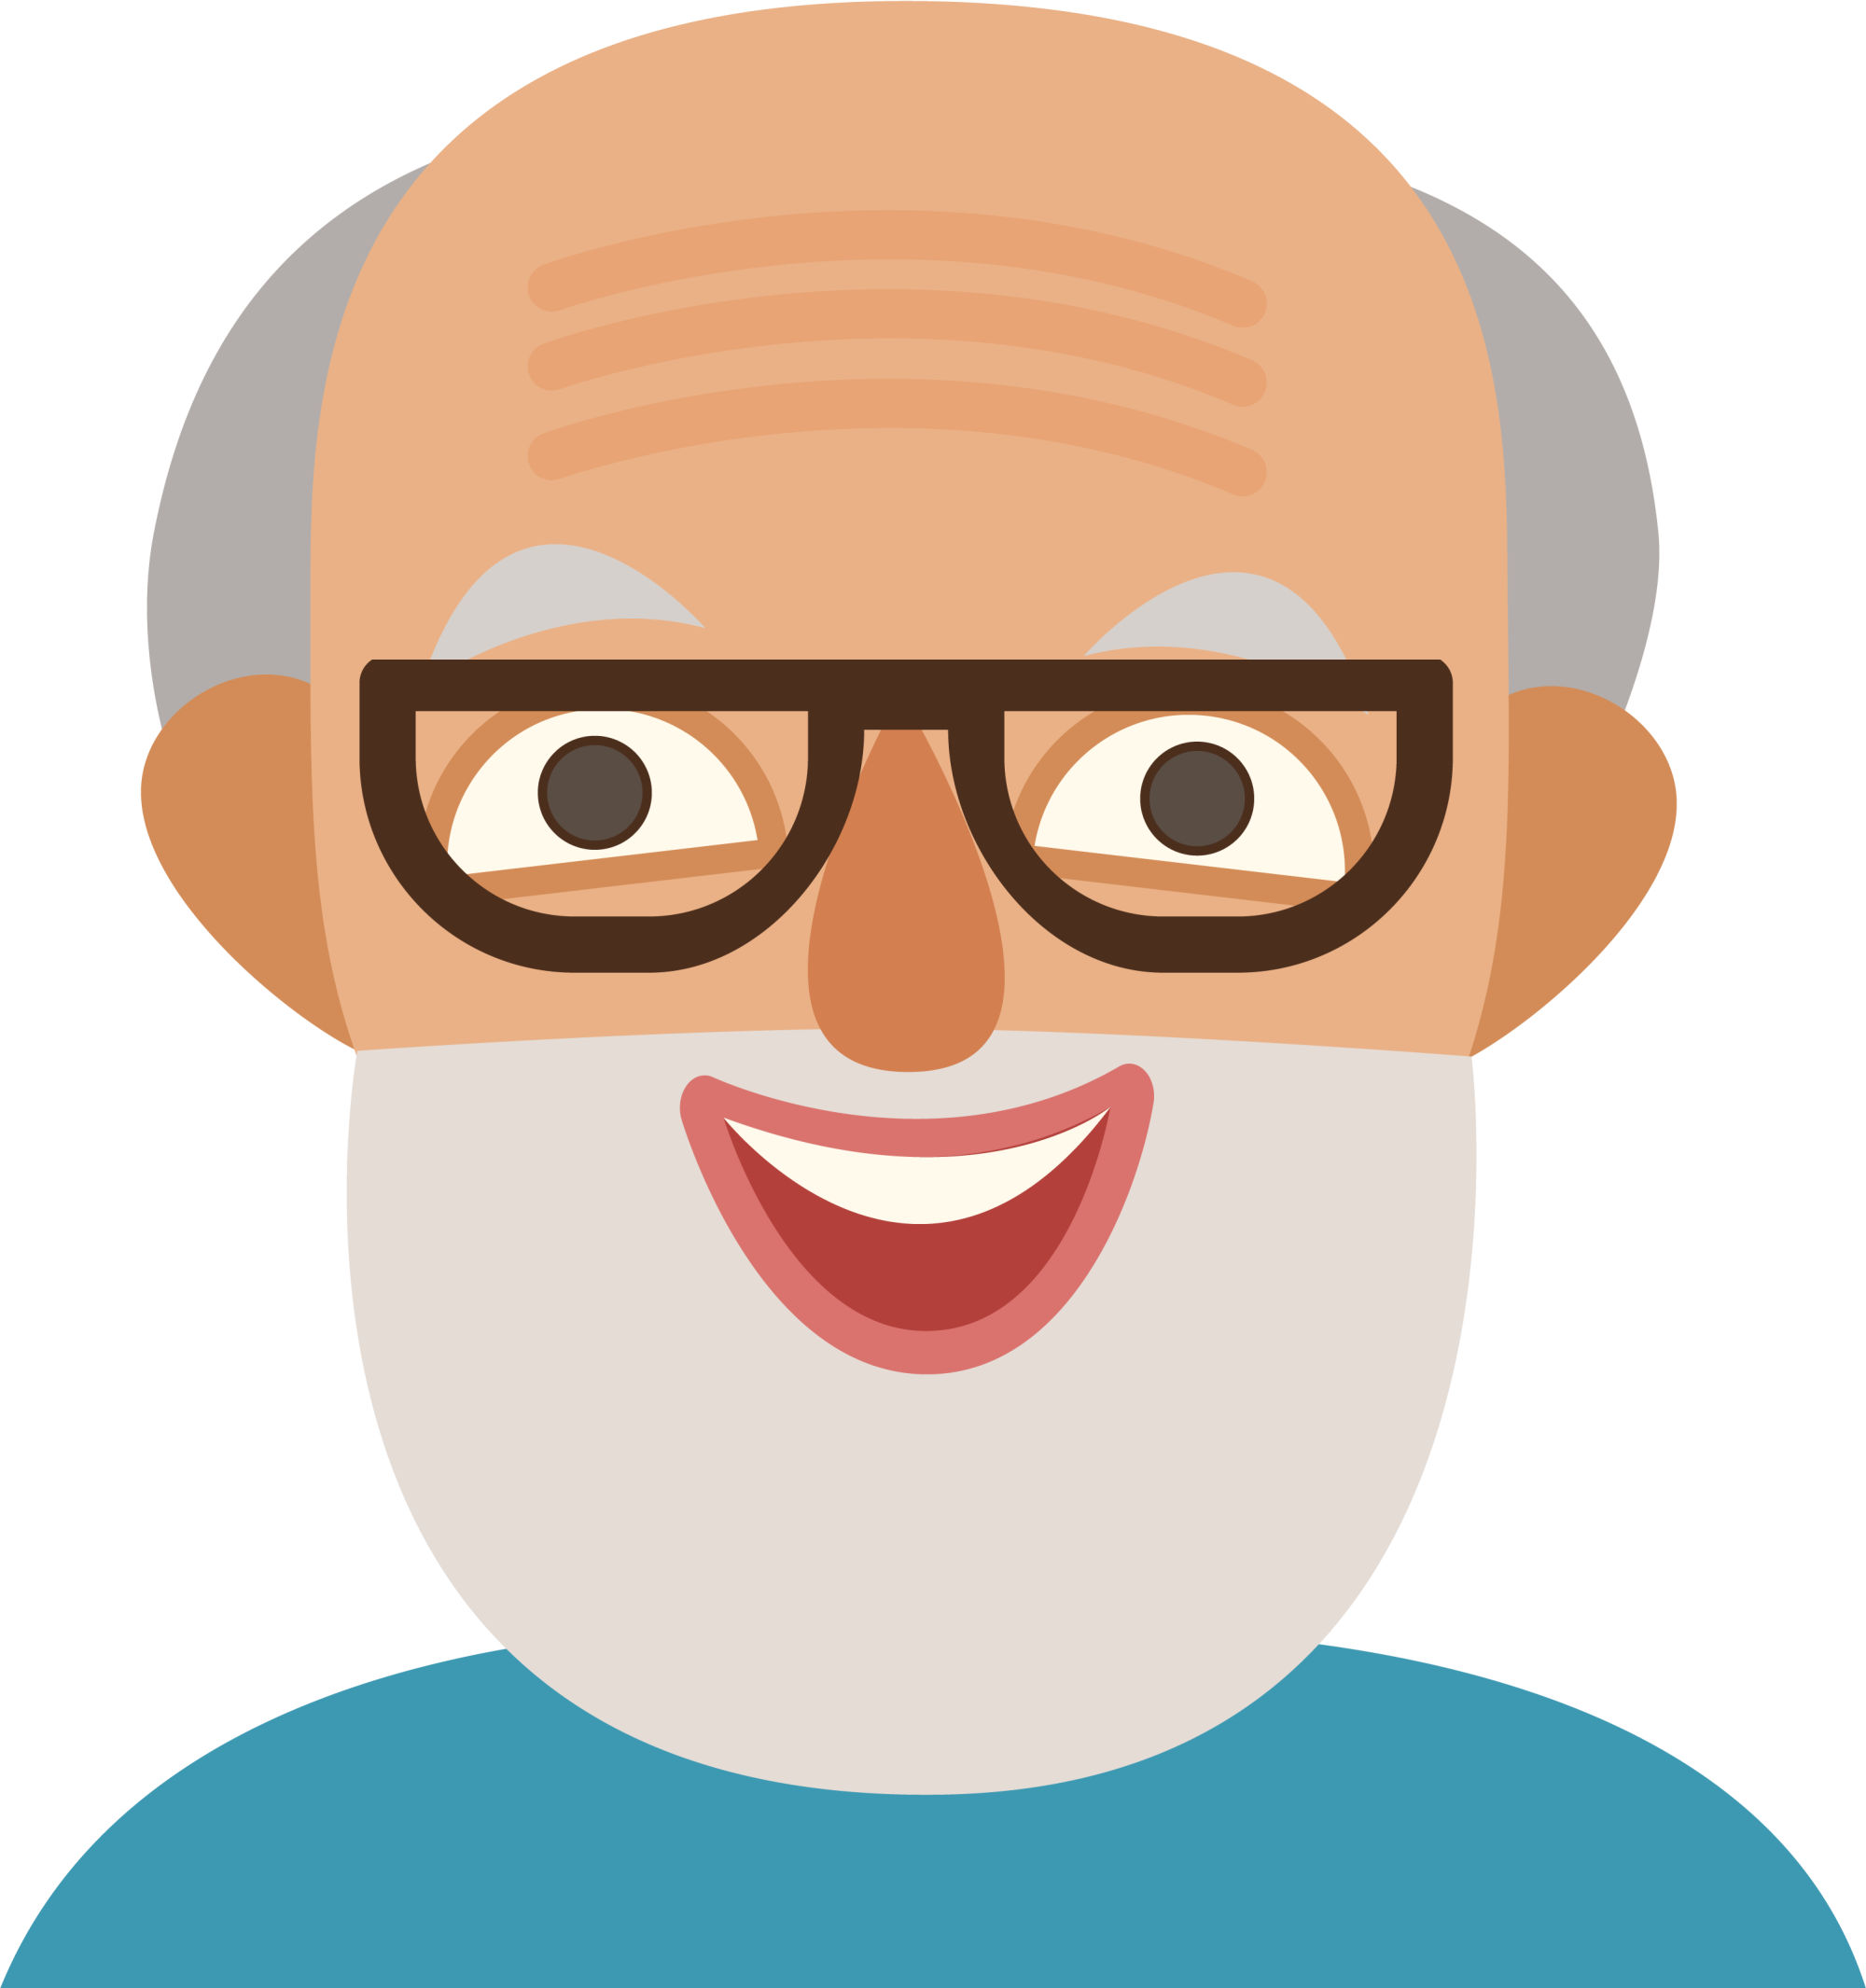 Cartoon Old Man PNG Images Transparent Background | PNG Play